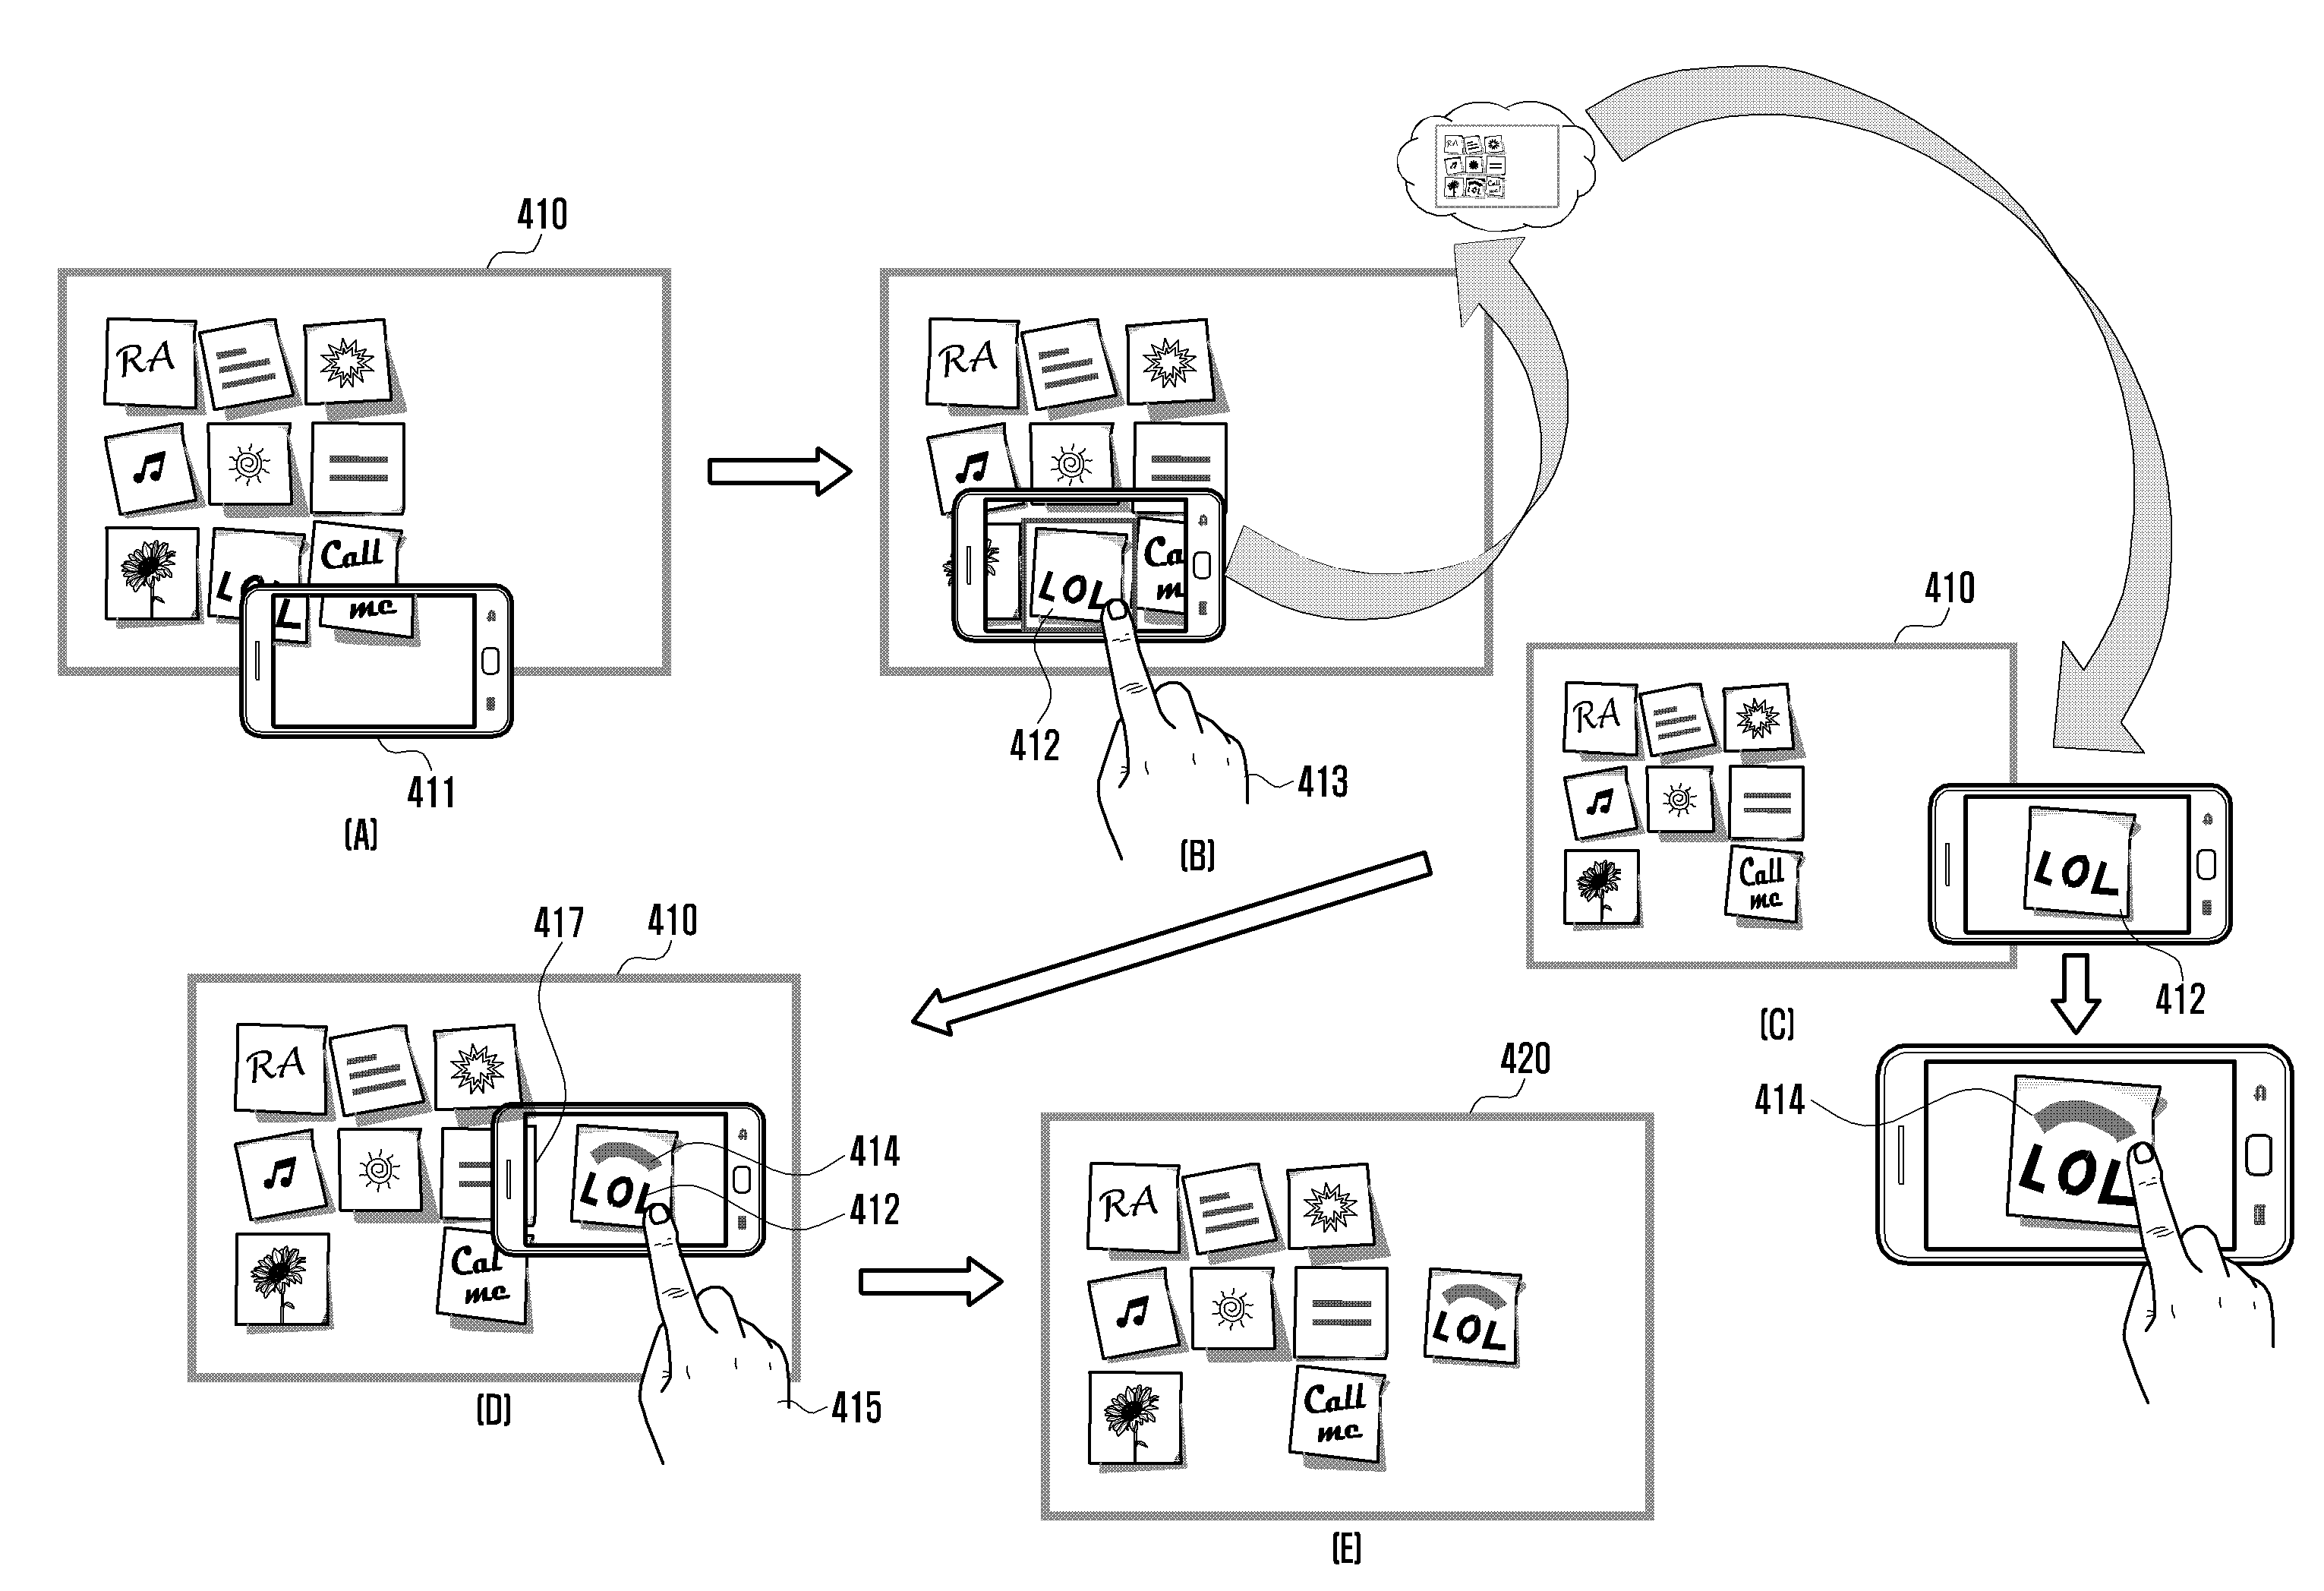 Collaborative data editing and processing system